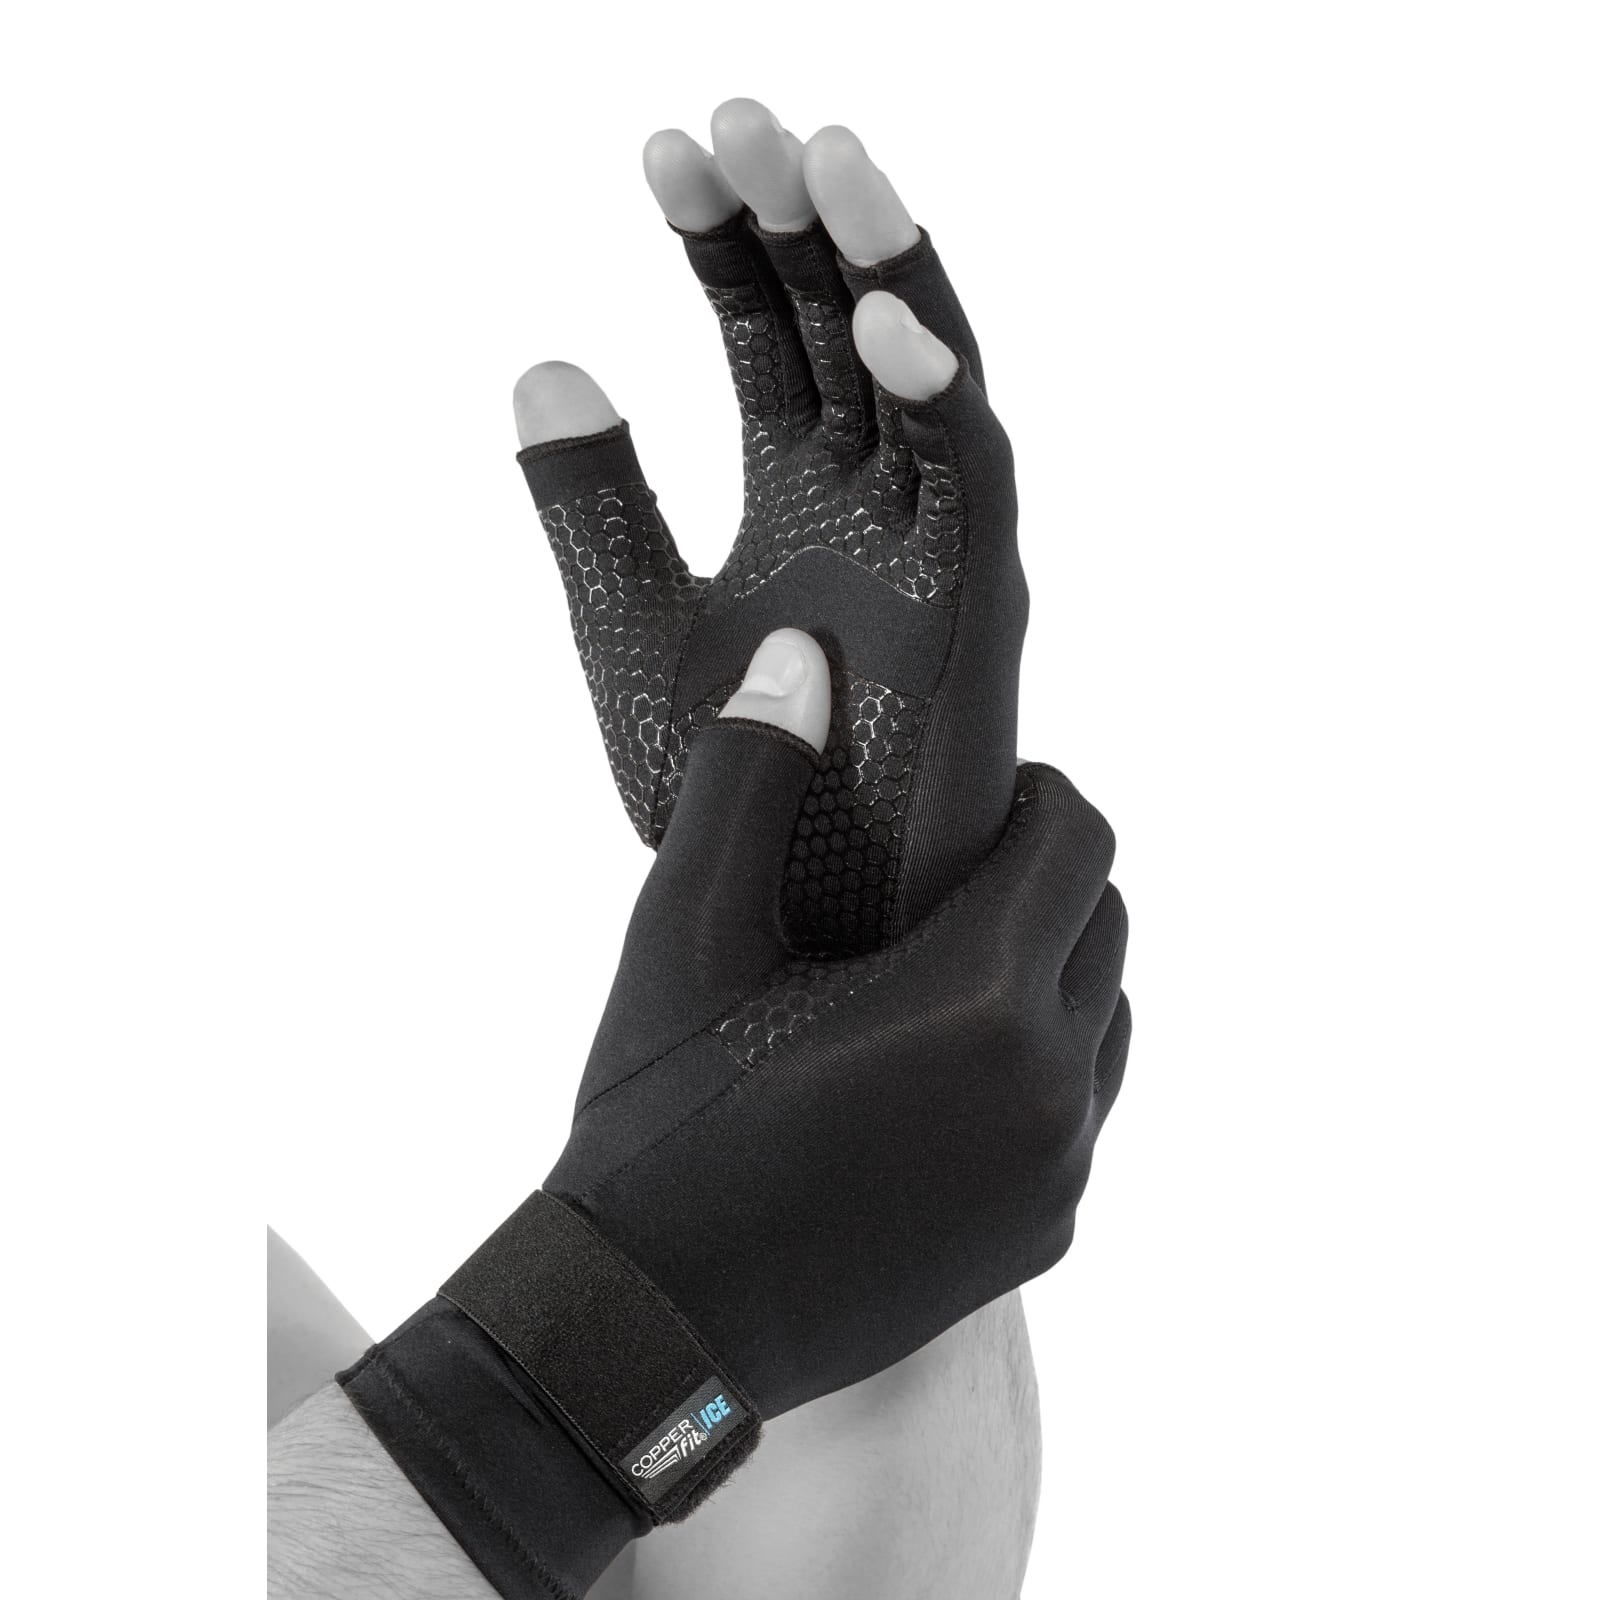 Ice Compression Gloves by Copper Fit at Fleet Farm